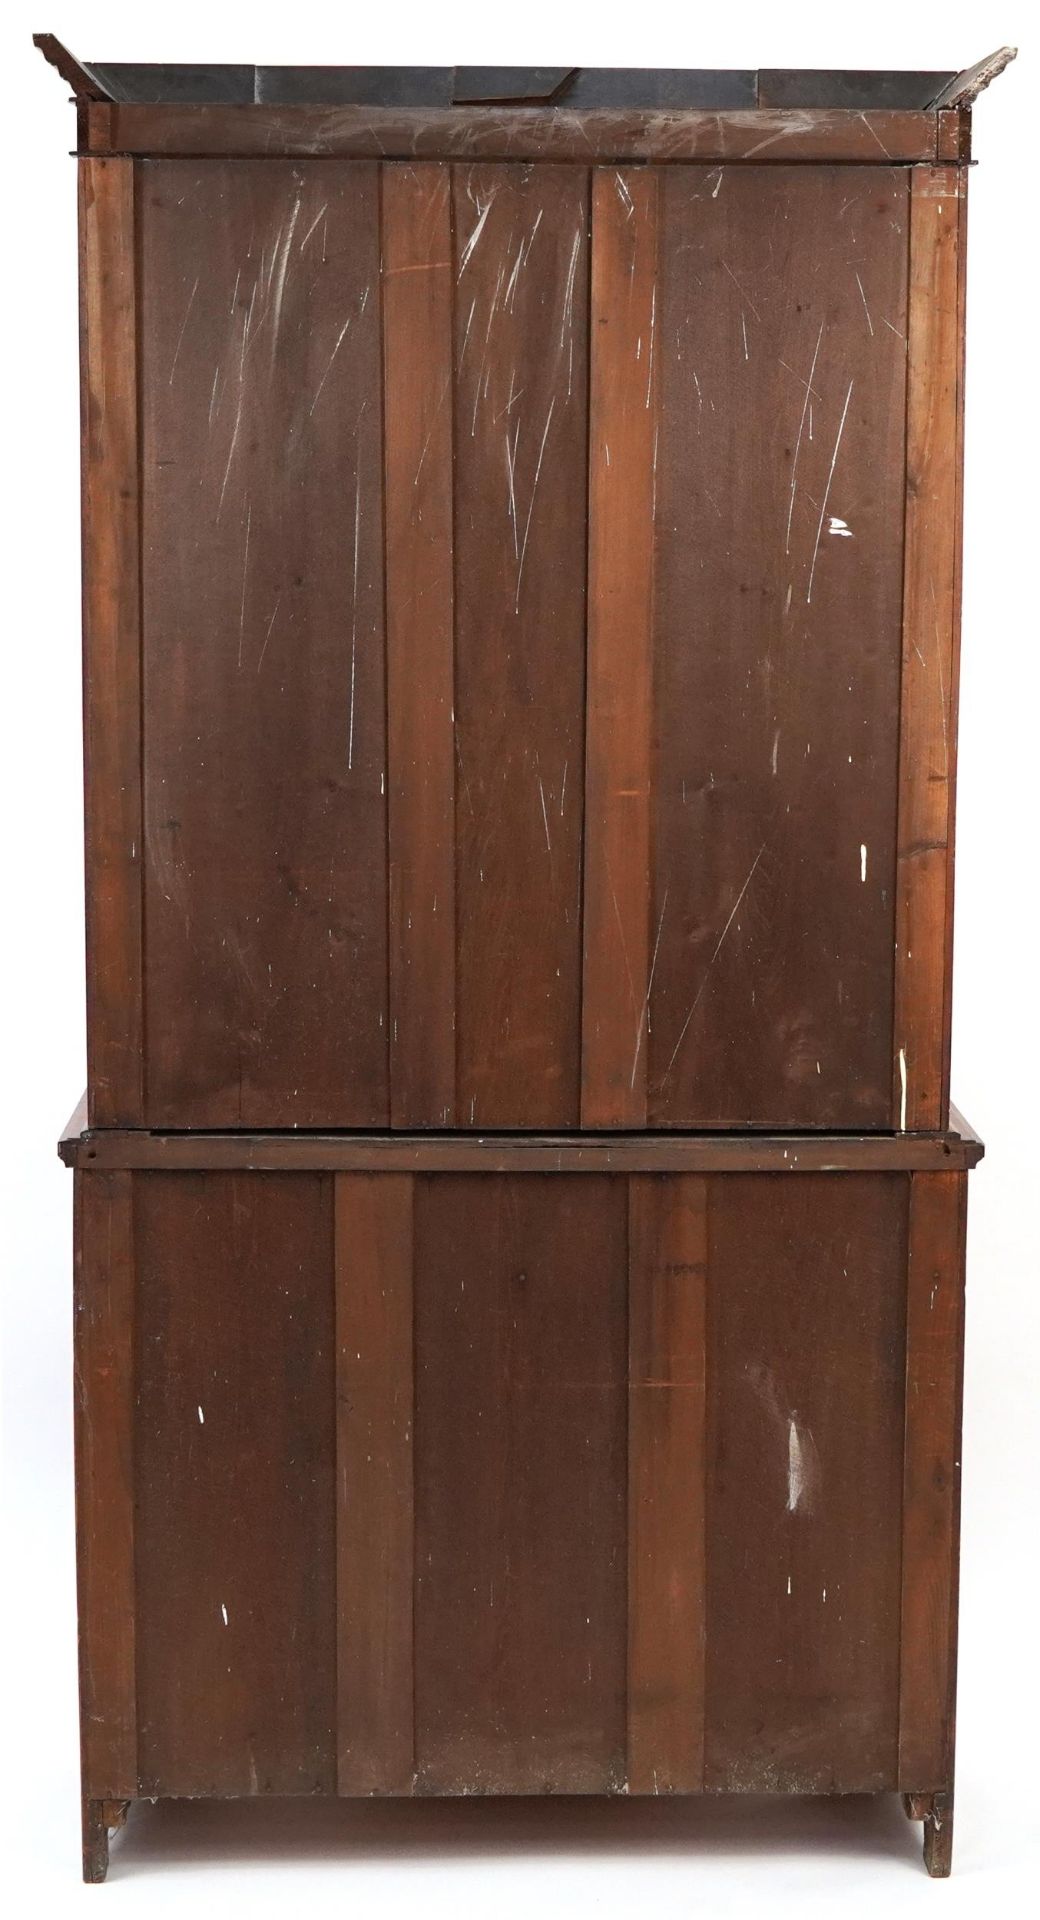 Edwardian mahogany bookcase with pair of glazed doors above pair of drawers and pair of cupboard - Image 2 of 2